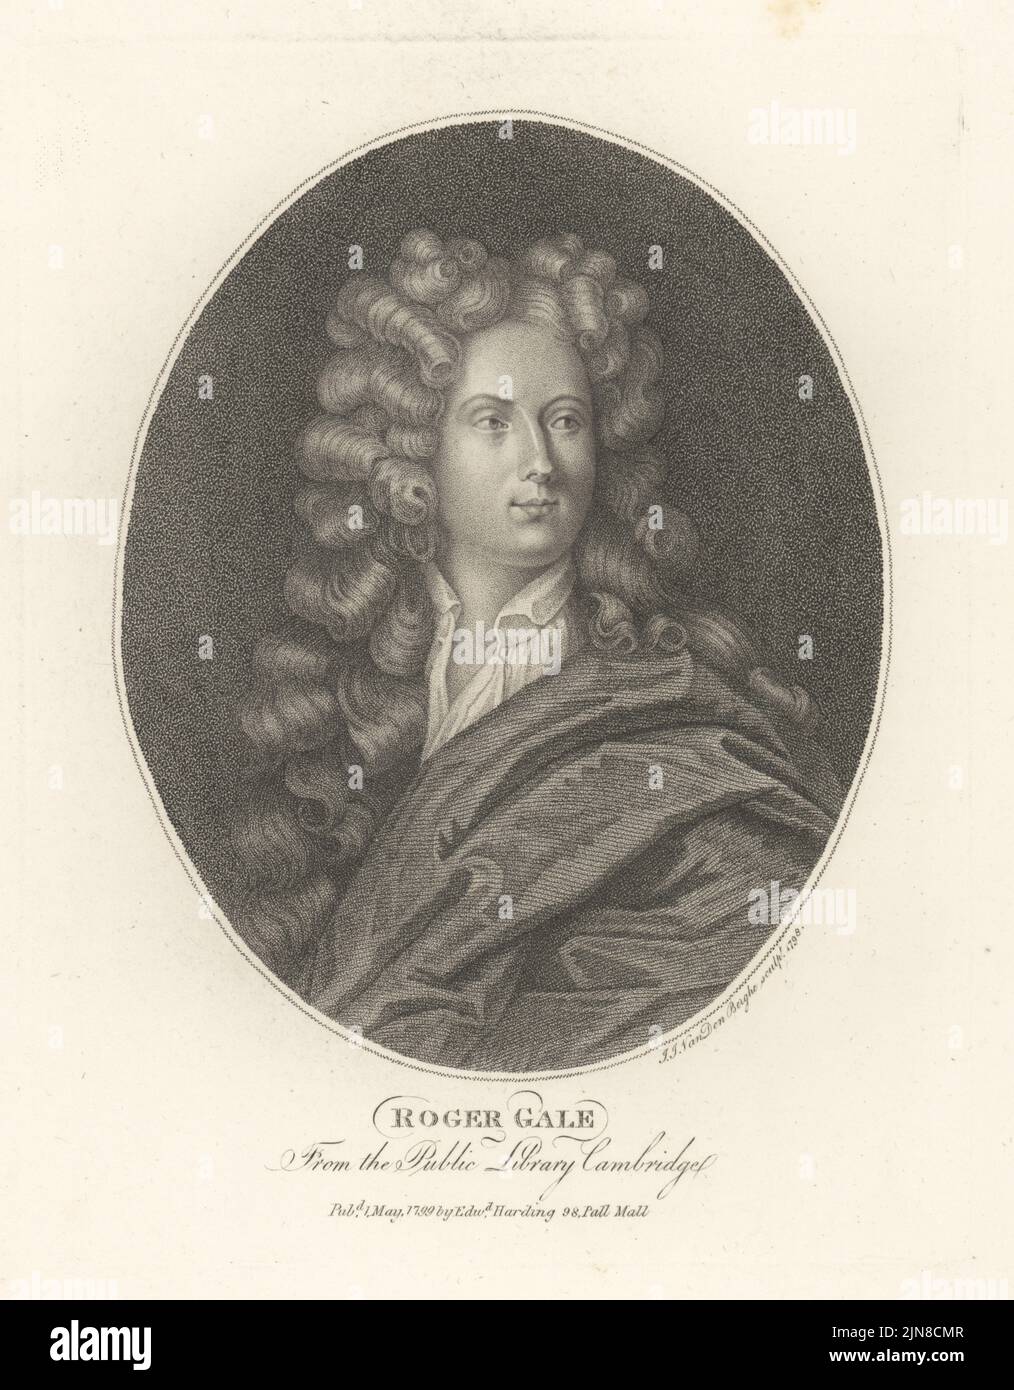 Roger Gale, English antiquary and historian, 1672-1744. Educated at Trinity College, Cambridge, VP of the Society of Antiquaries, Treasurer of the Royal Society. In powdered wig, cloak and linen shirt. Copperplate engraving by Ignatius Joseph van den Berghe from John Adolphus’ The British Cabinet, containing Portraits of Illustrious Personages, printed by T. Bensley for E. Harding, 98 Pall Mall, London, 1800. Stock Photo